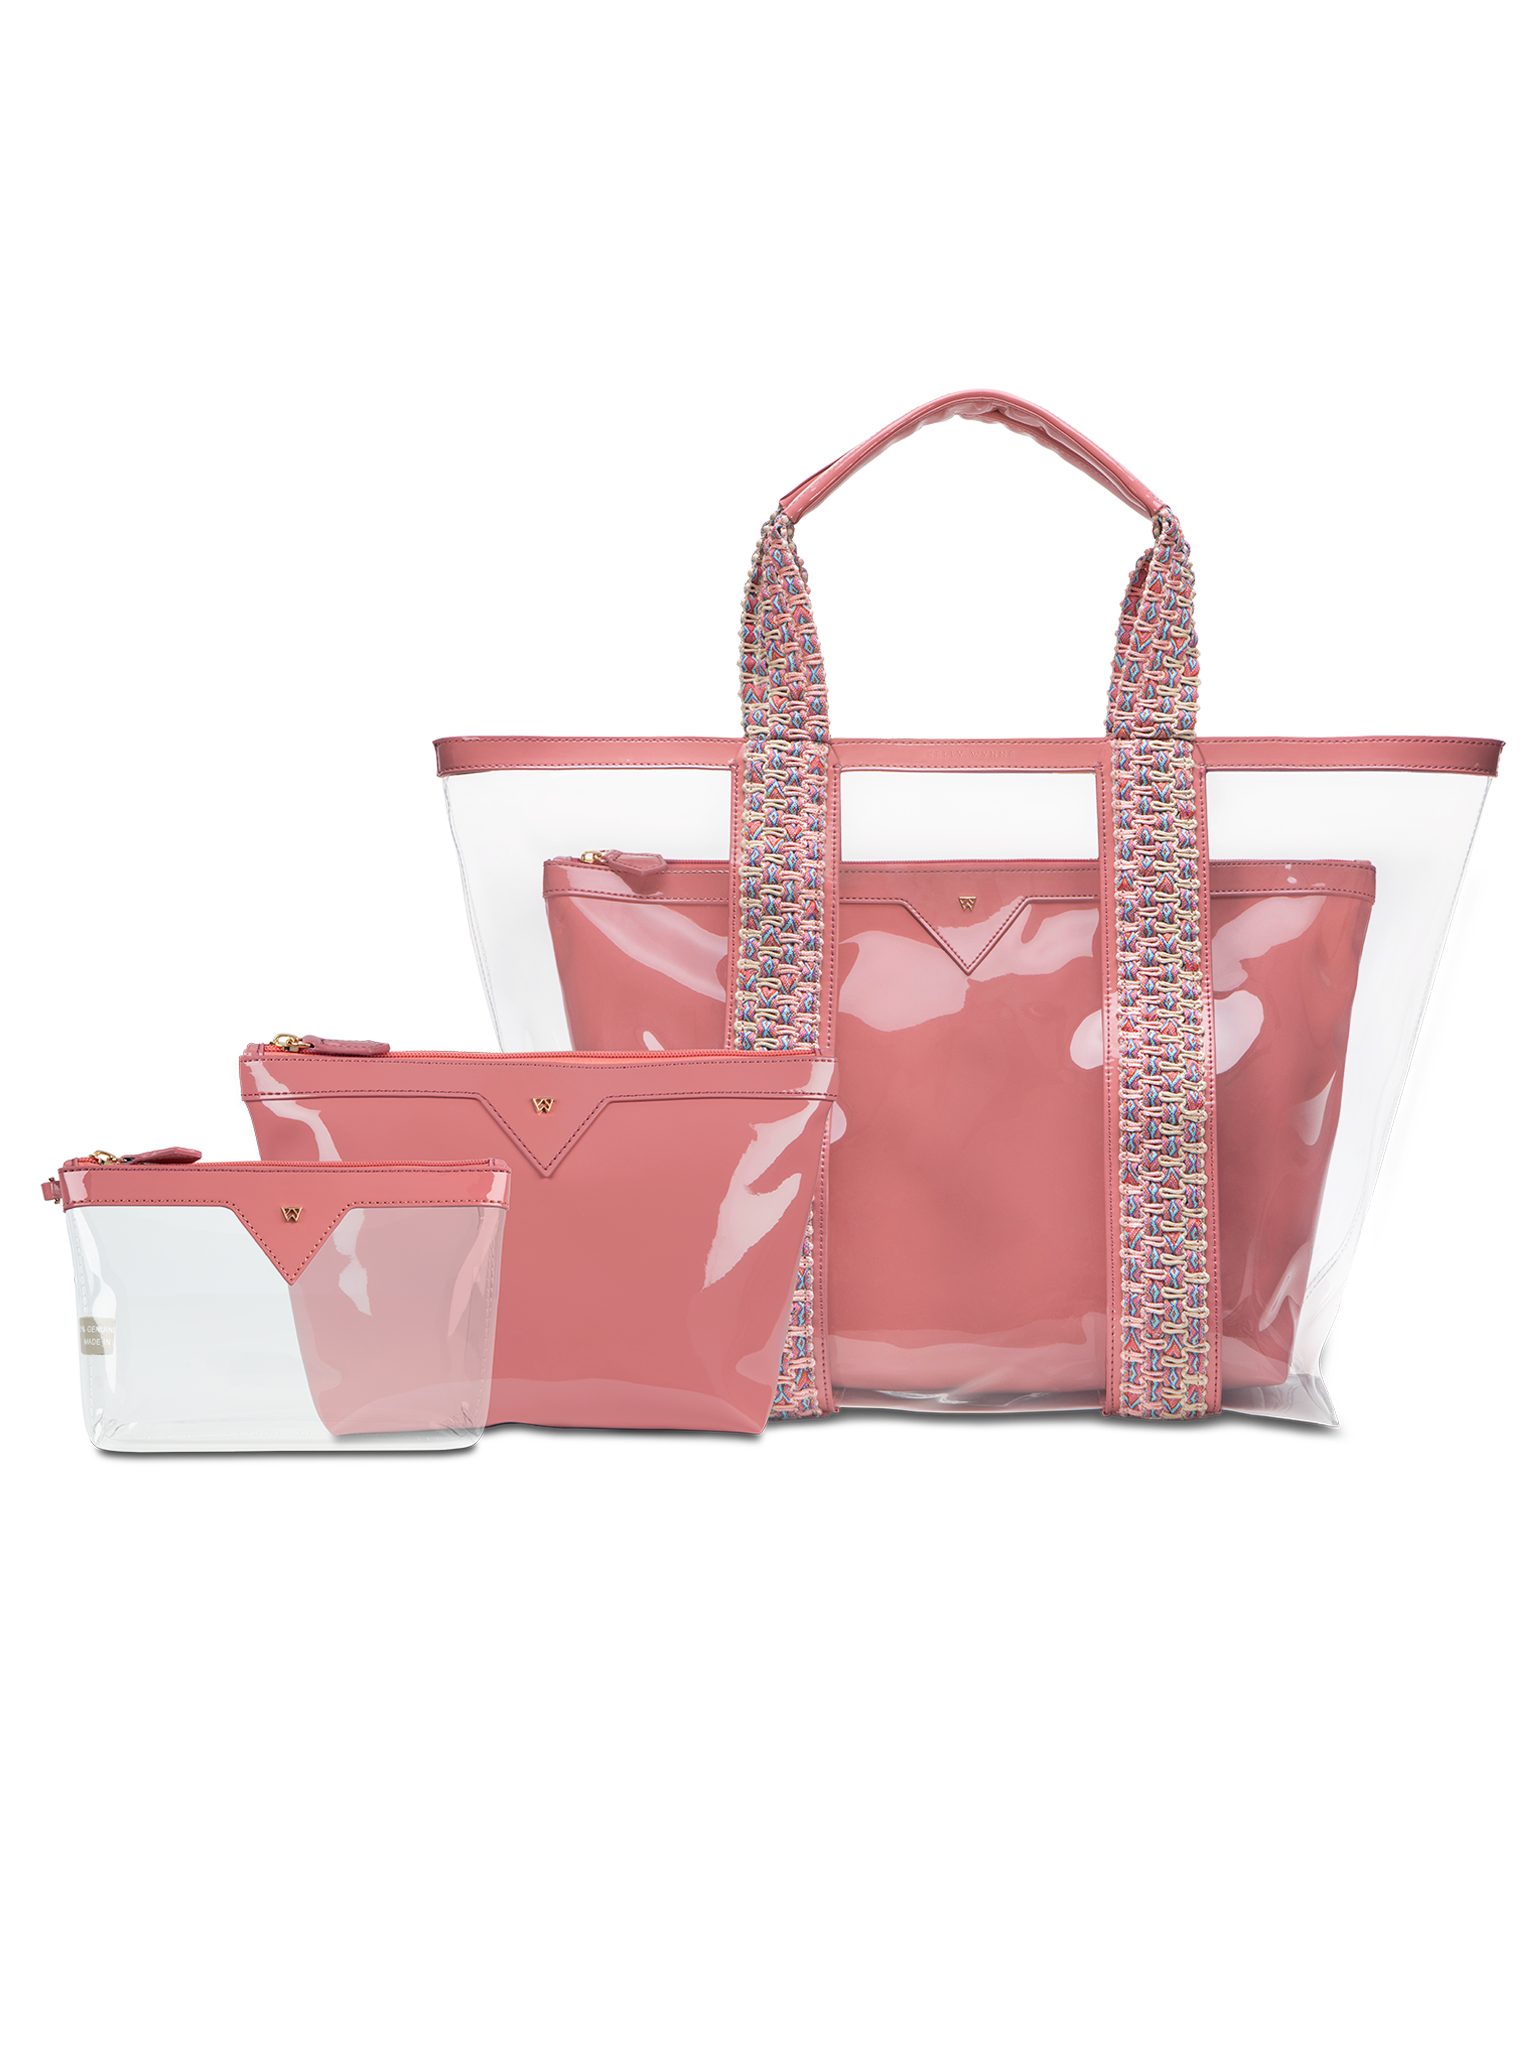 Don’t forget to add on our matching accessories in rose, to help keep you perfectly organized for all your vacation fun 